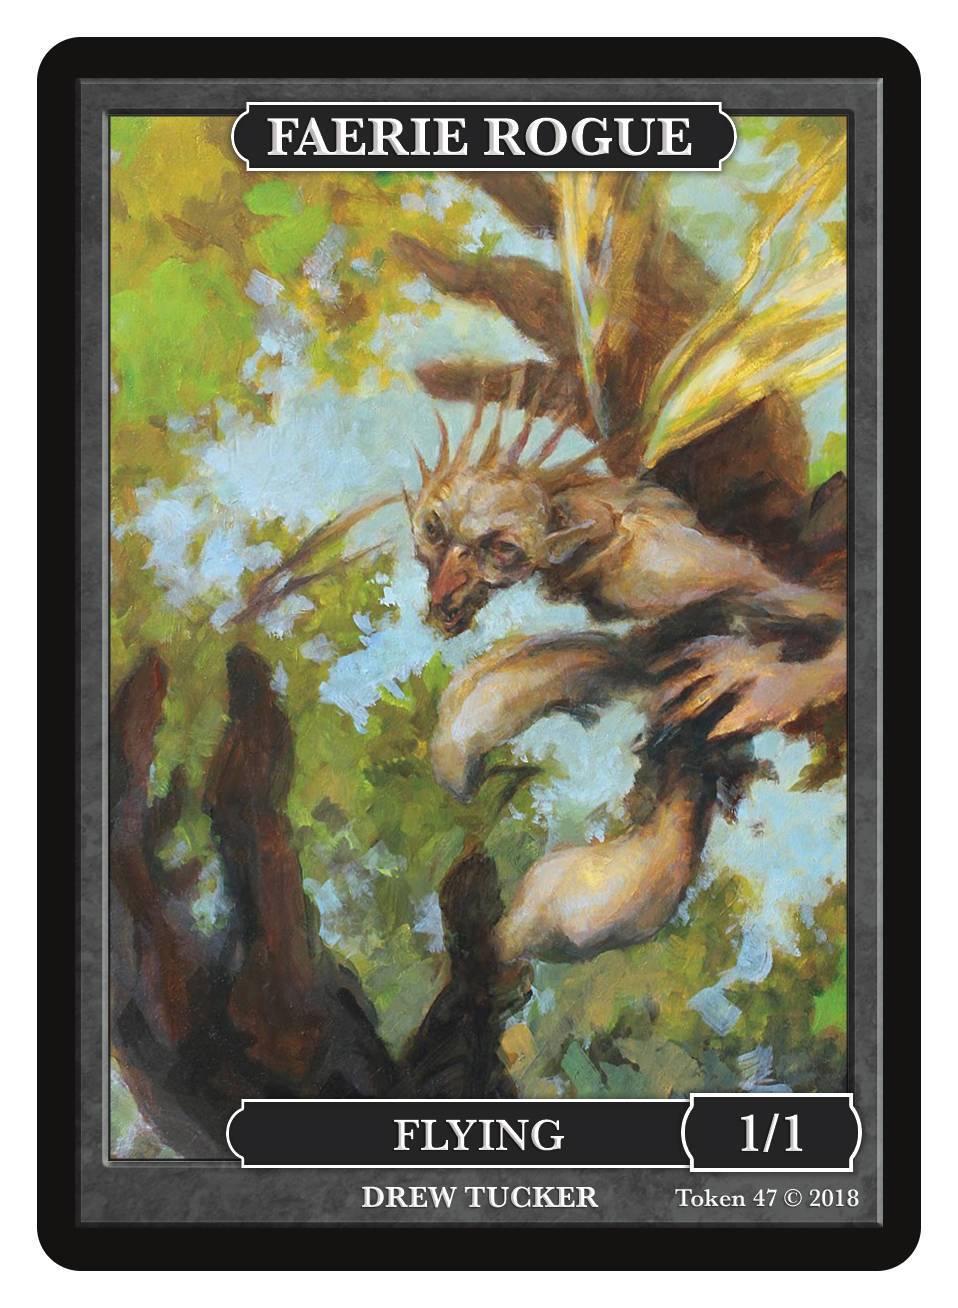 Faerie Rogue Token (1/1 - Flying) by Drew Tucker - Token - Original Magic Art - Accessories for Magic the Gathering and other card games